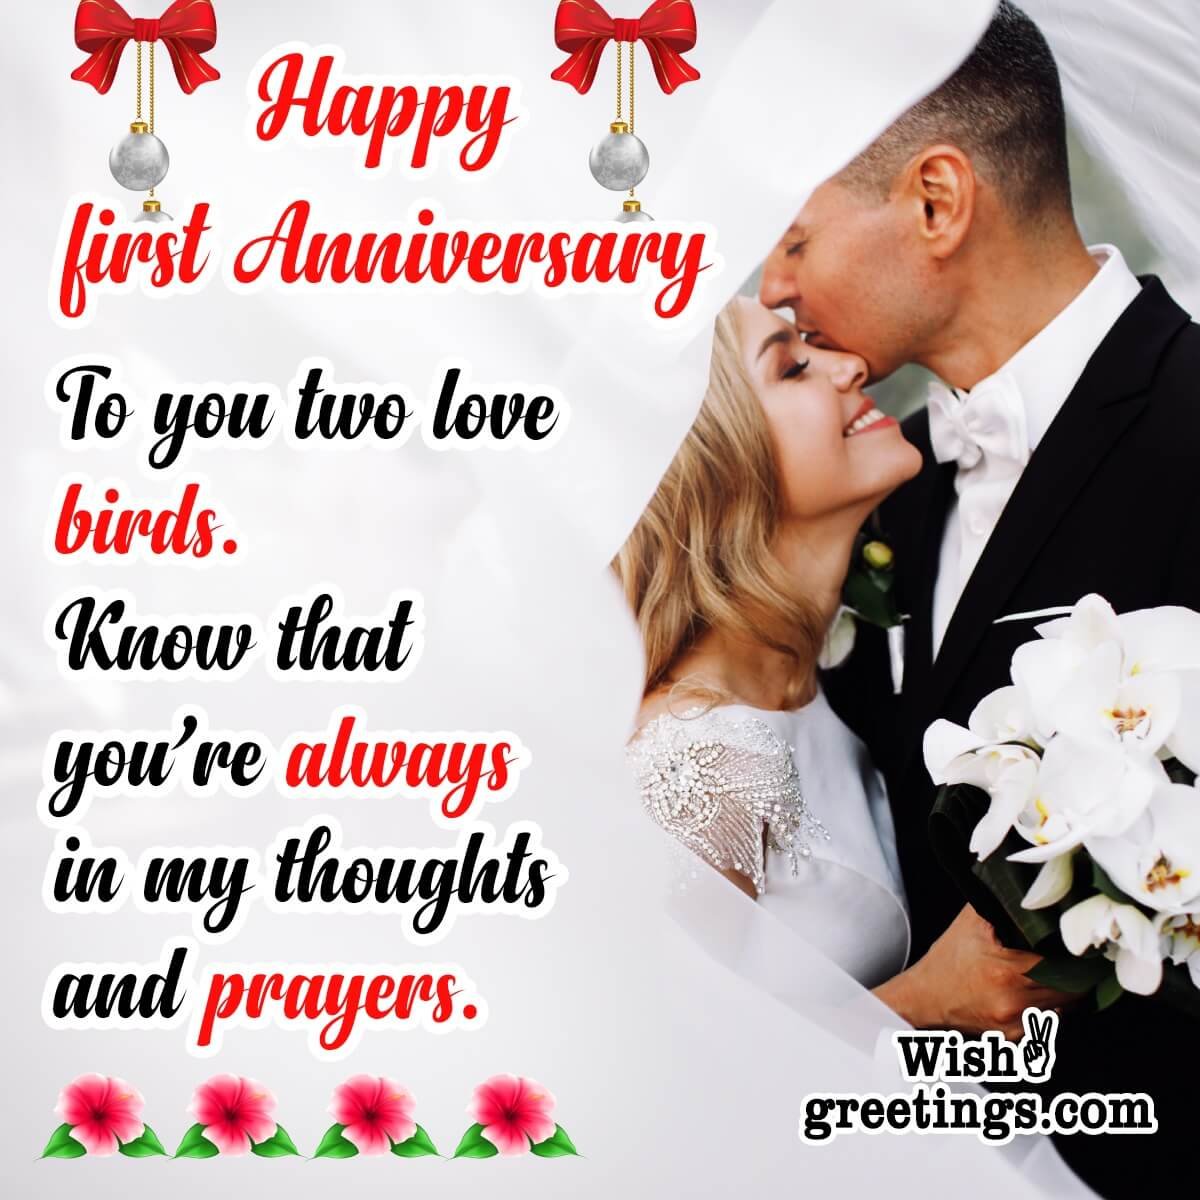 Collection of Top 999+ Amazing Wedding Anniversary Wishes Images in Full 4K